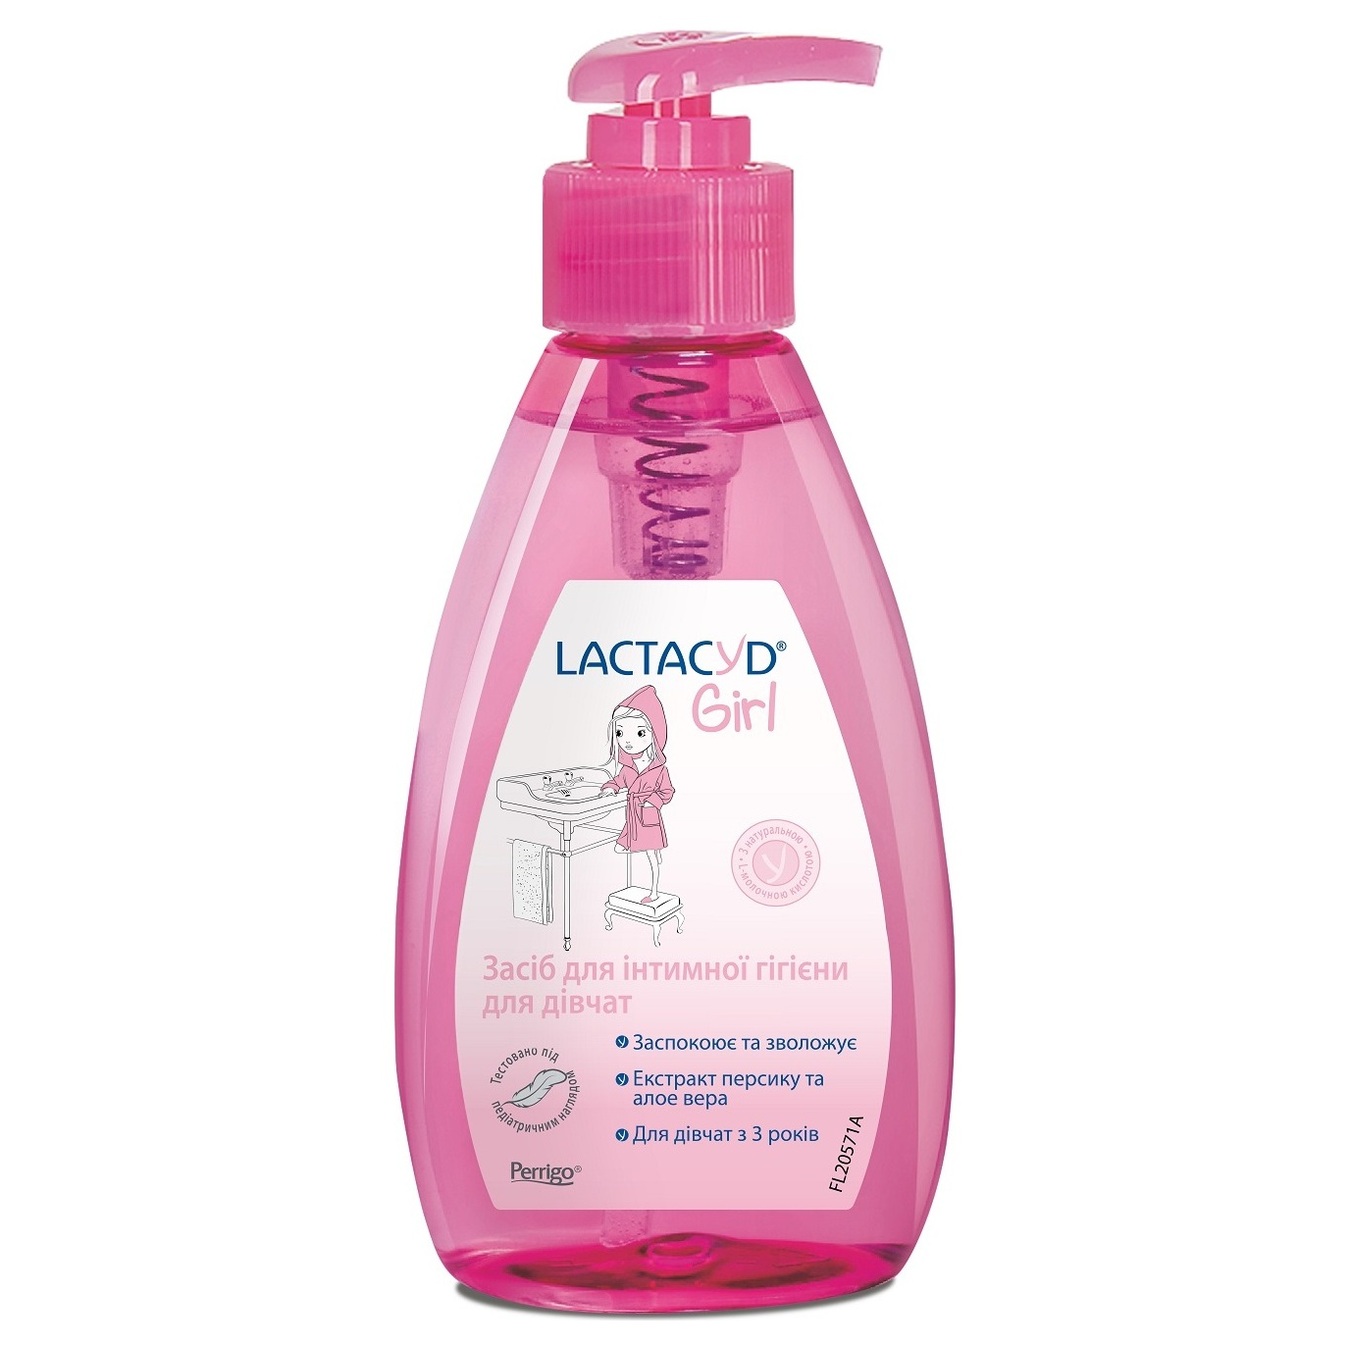 Lactacyd With Dispenser For Girls Intimate Hygiene Gel 200ml 5